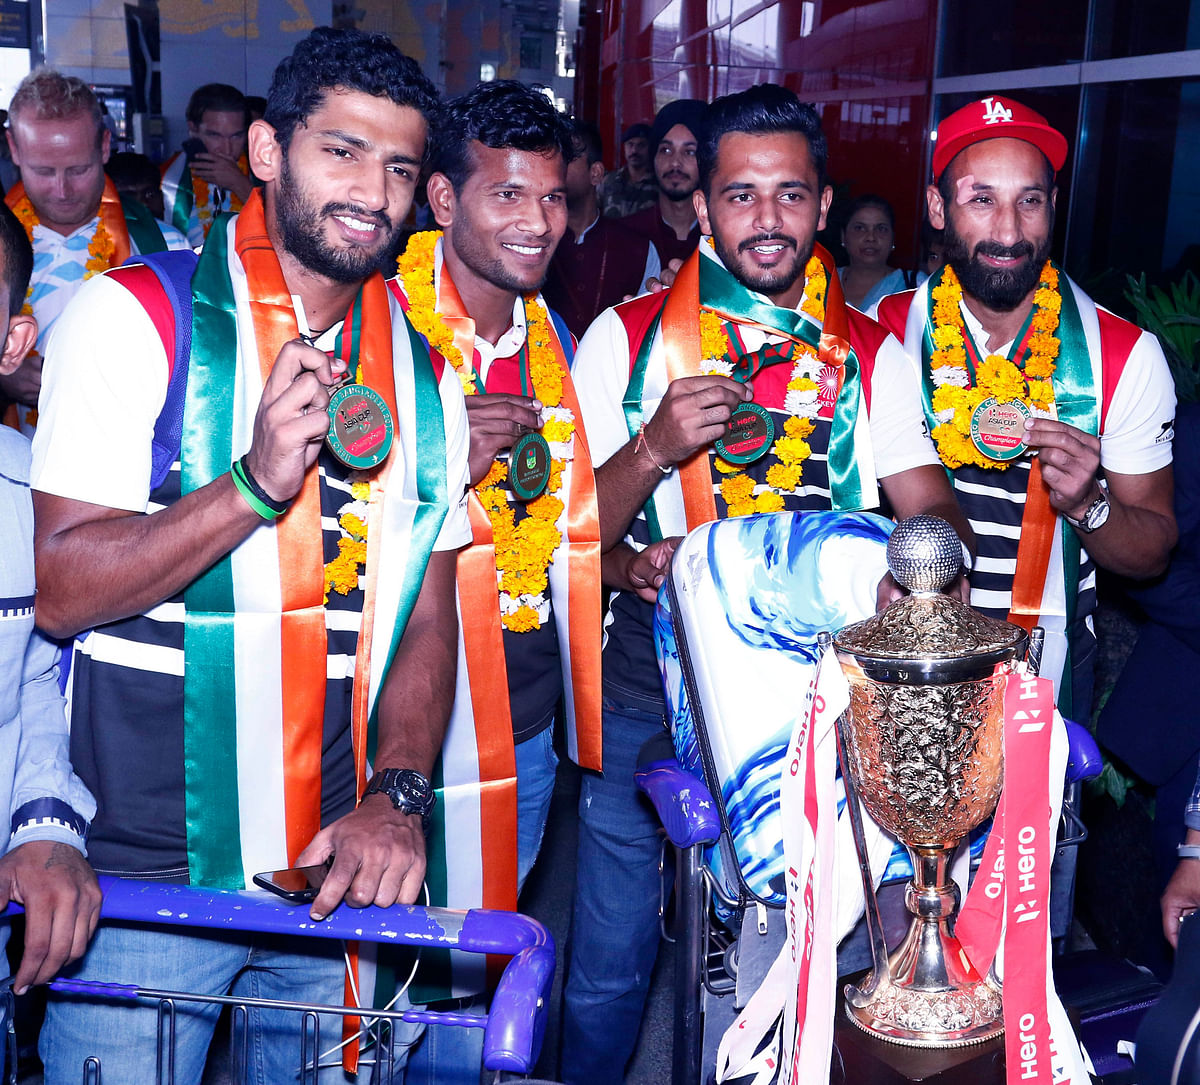 The Indian hockey team returned home after winning the 2017 Asia Cup in Dhaka. 